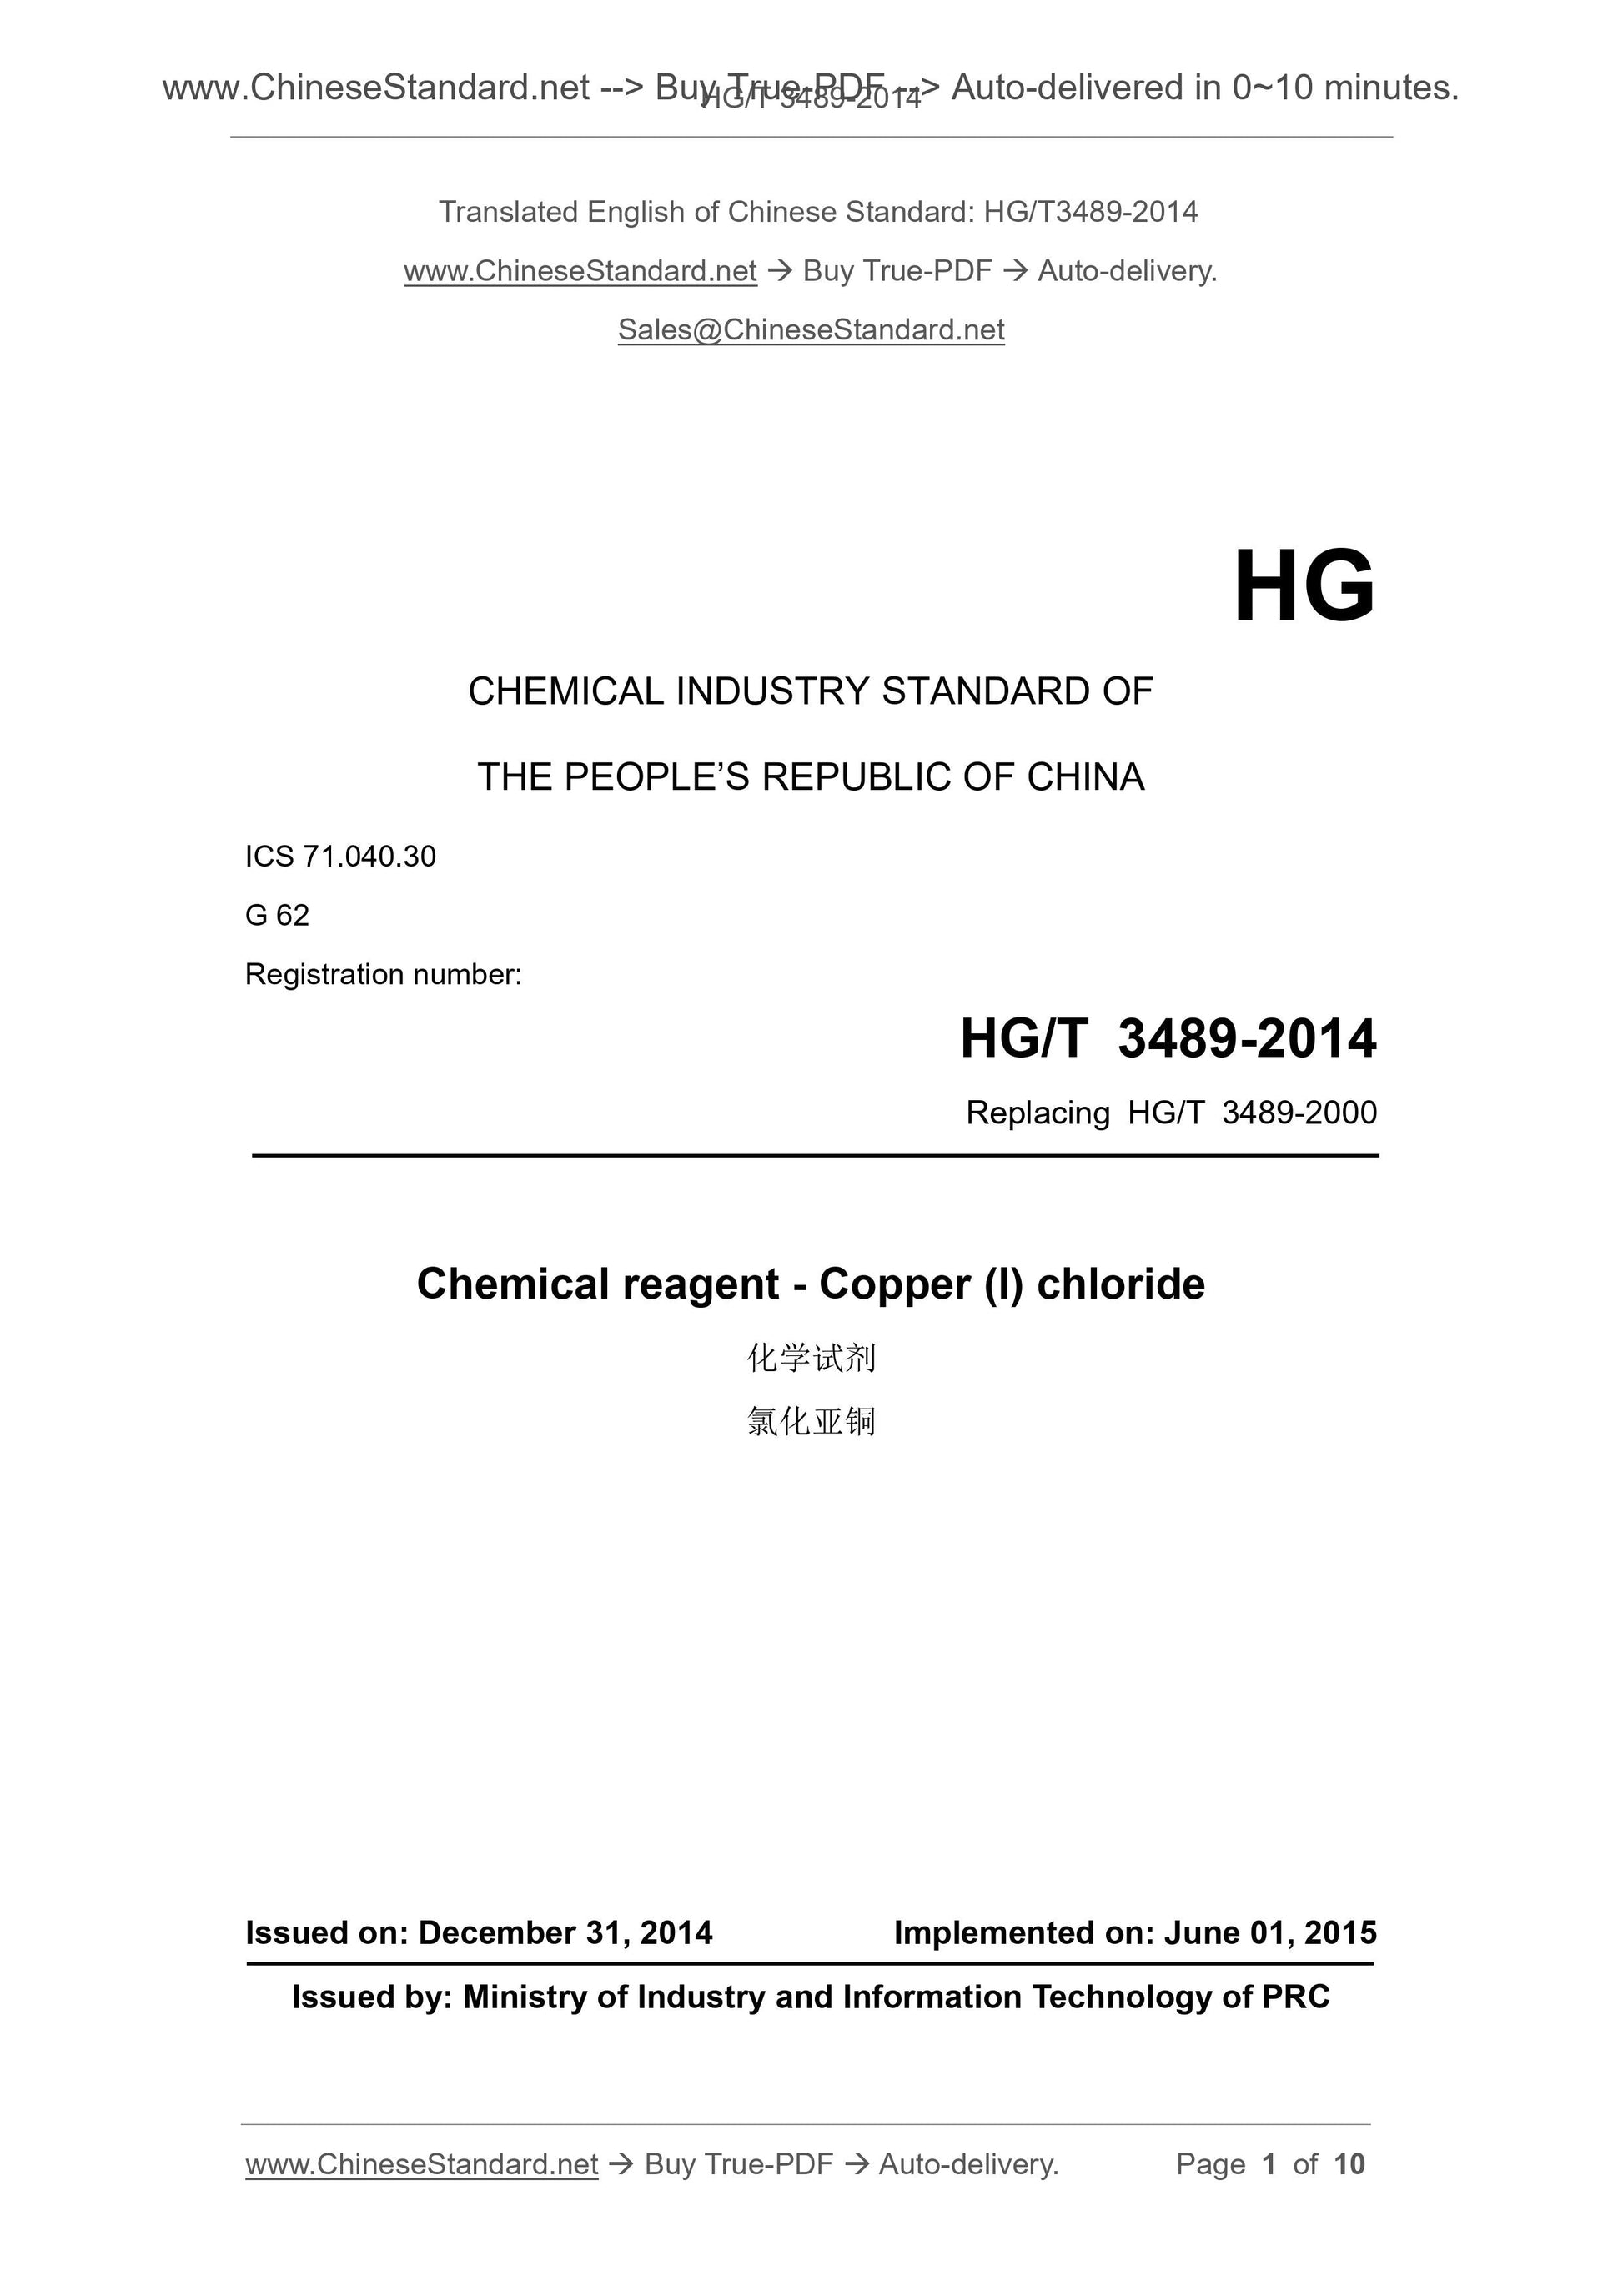 HG/T 3489-2014 Page 1